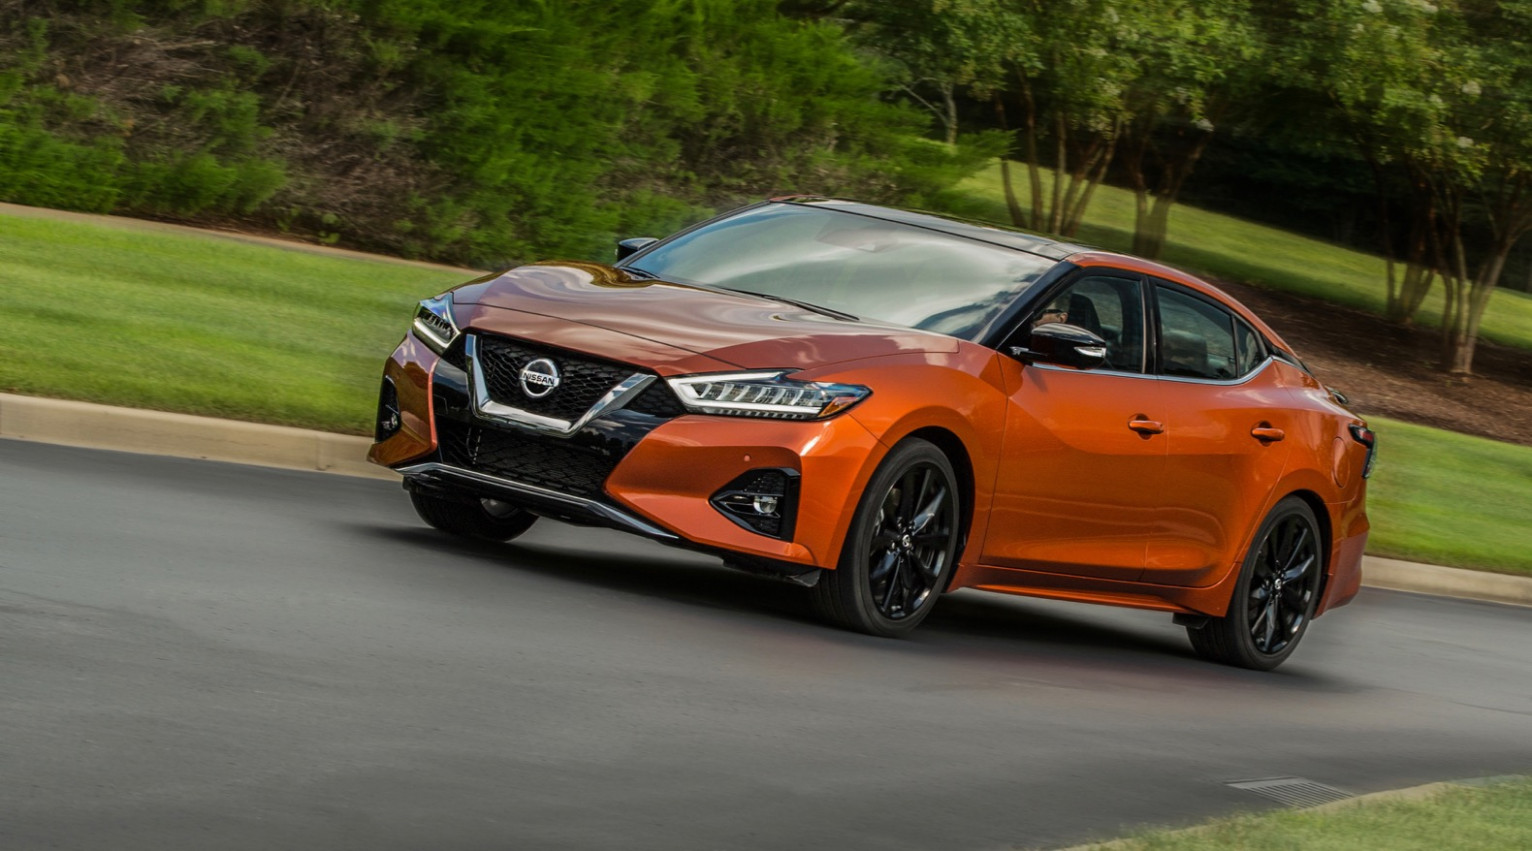 Prices When Will The 2022 Nissan Maxima Come Out